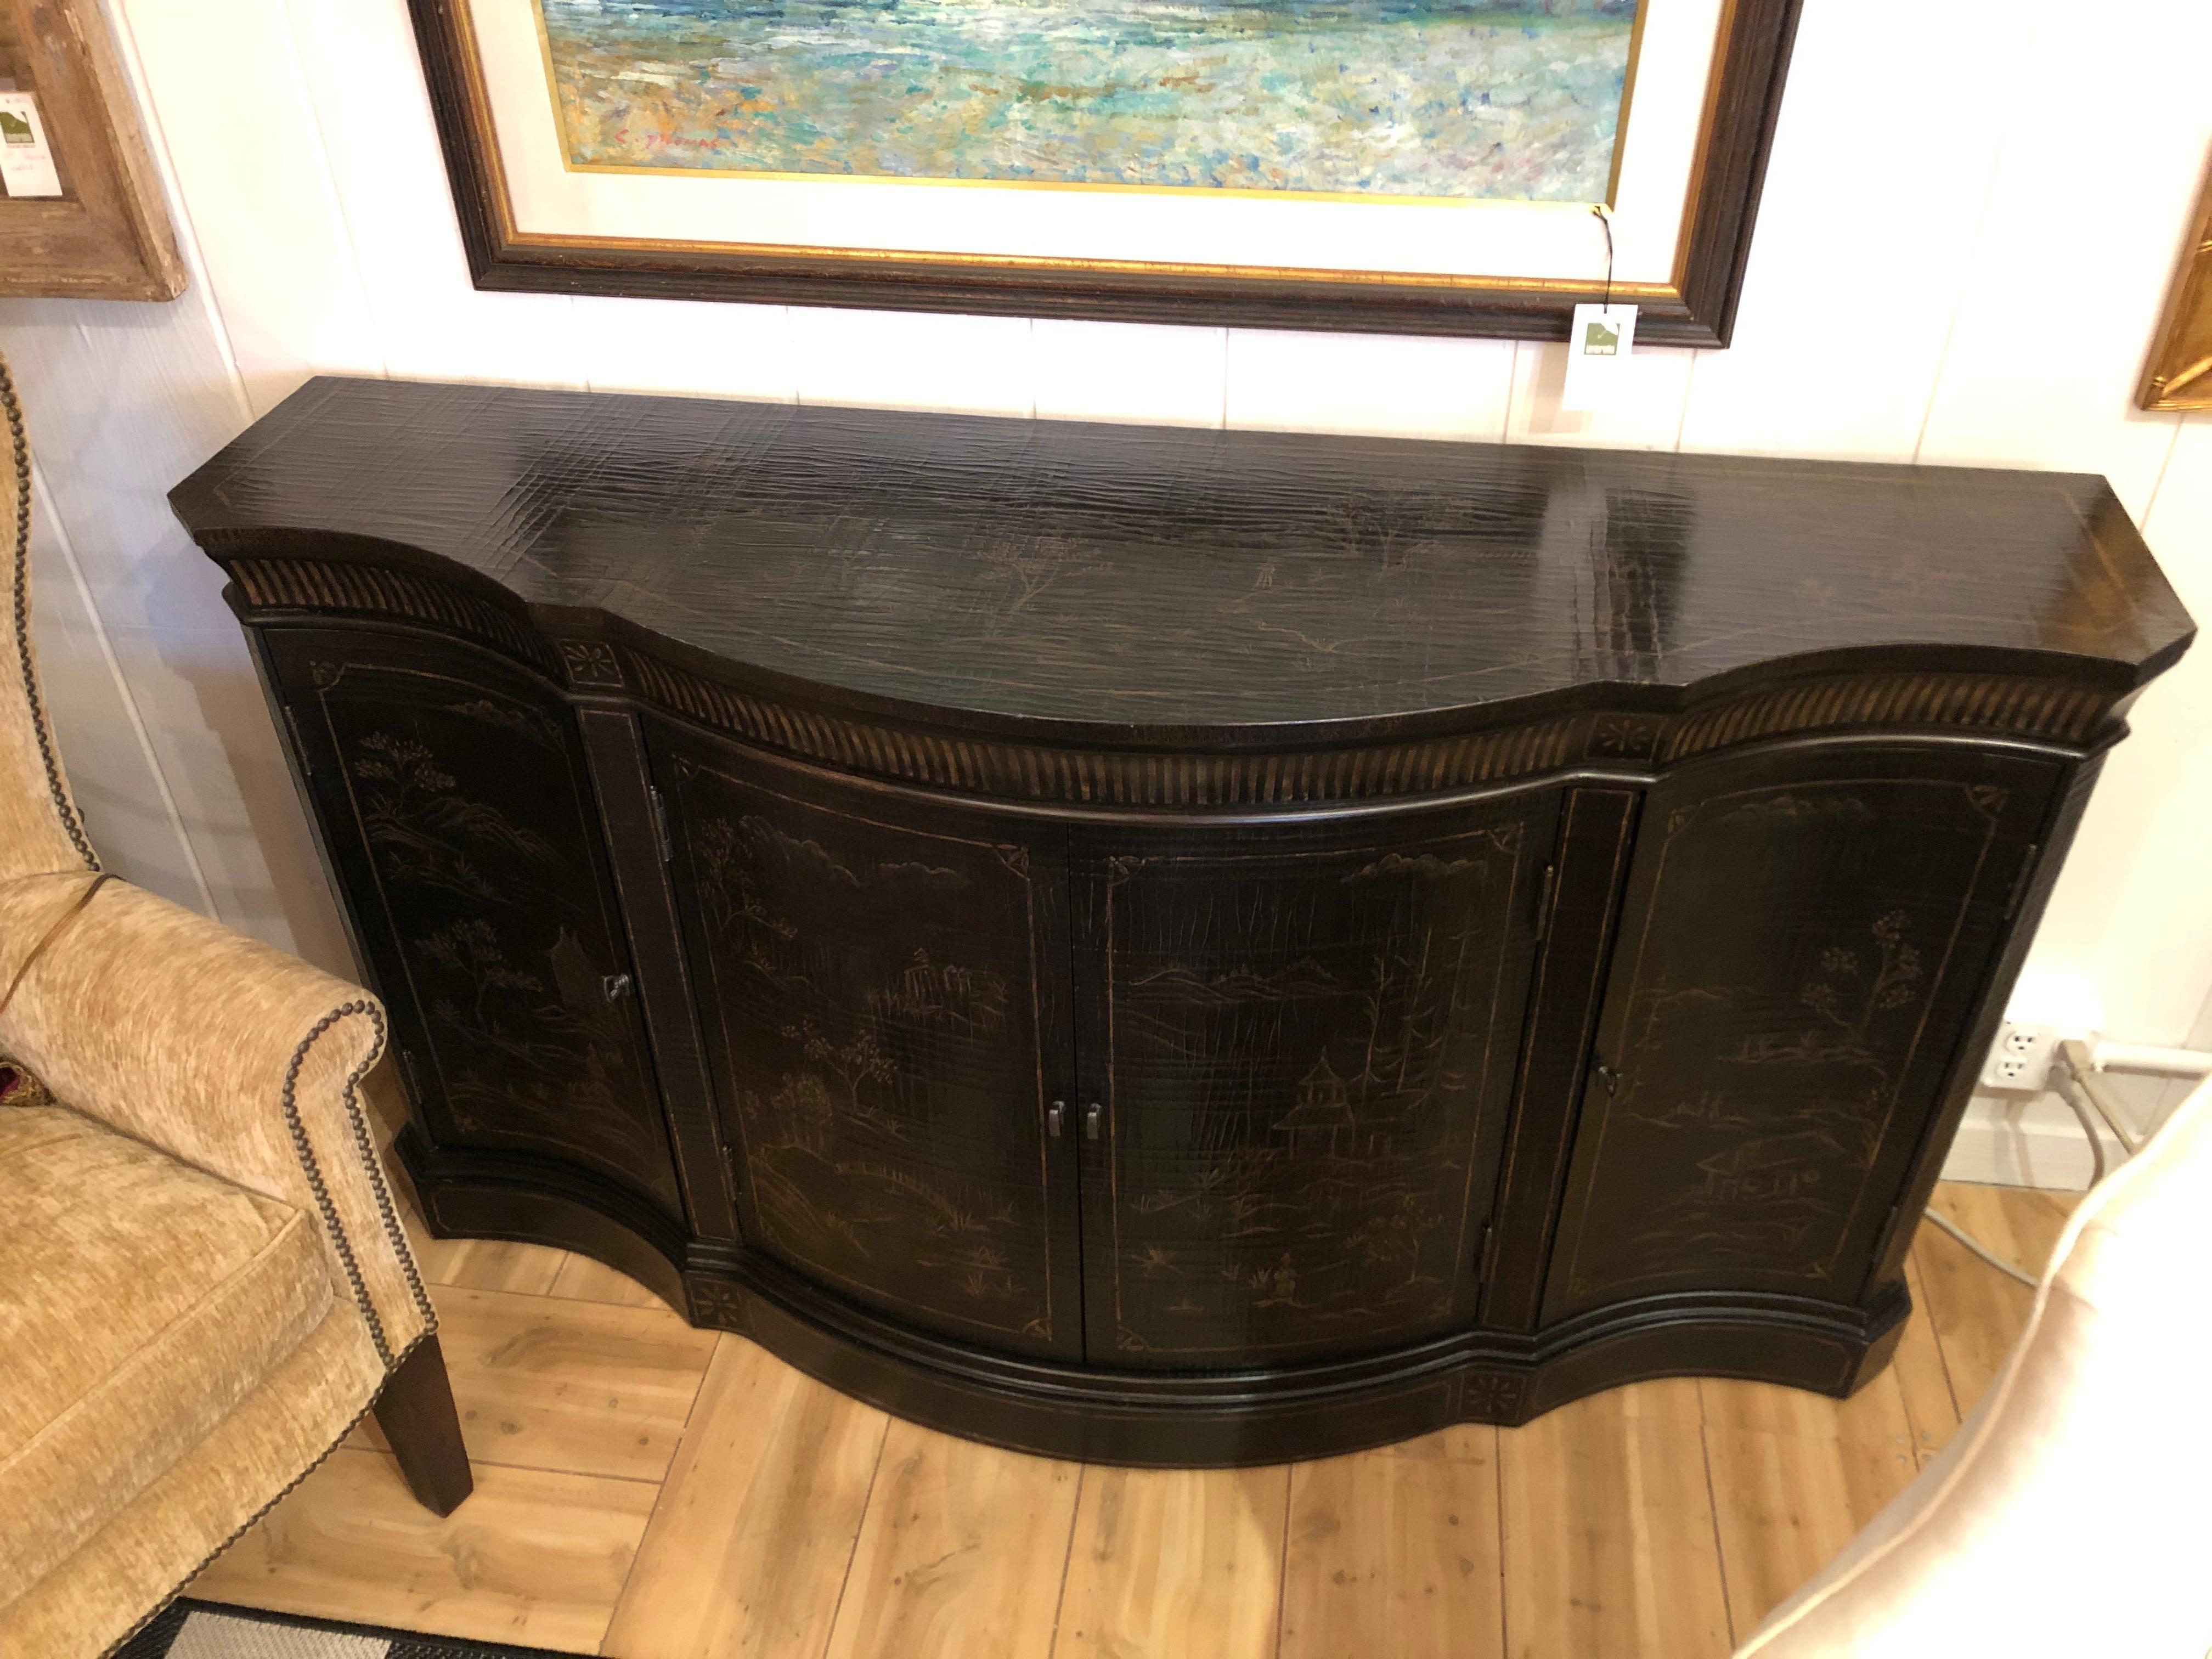 Impressive striking chinoiserie style sideboard with serpentine shape and lovely Asian motif painted decoration in gold. There is textured craquelure on the top, the central as well as side doors that open to reveal storage space.
This piece was an